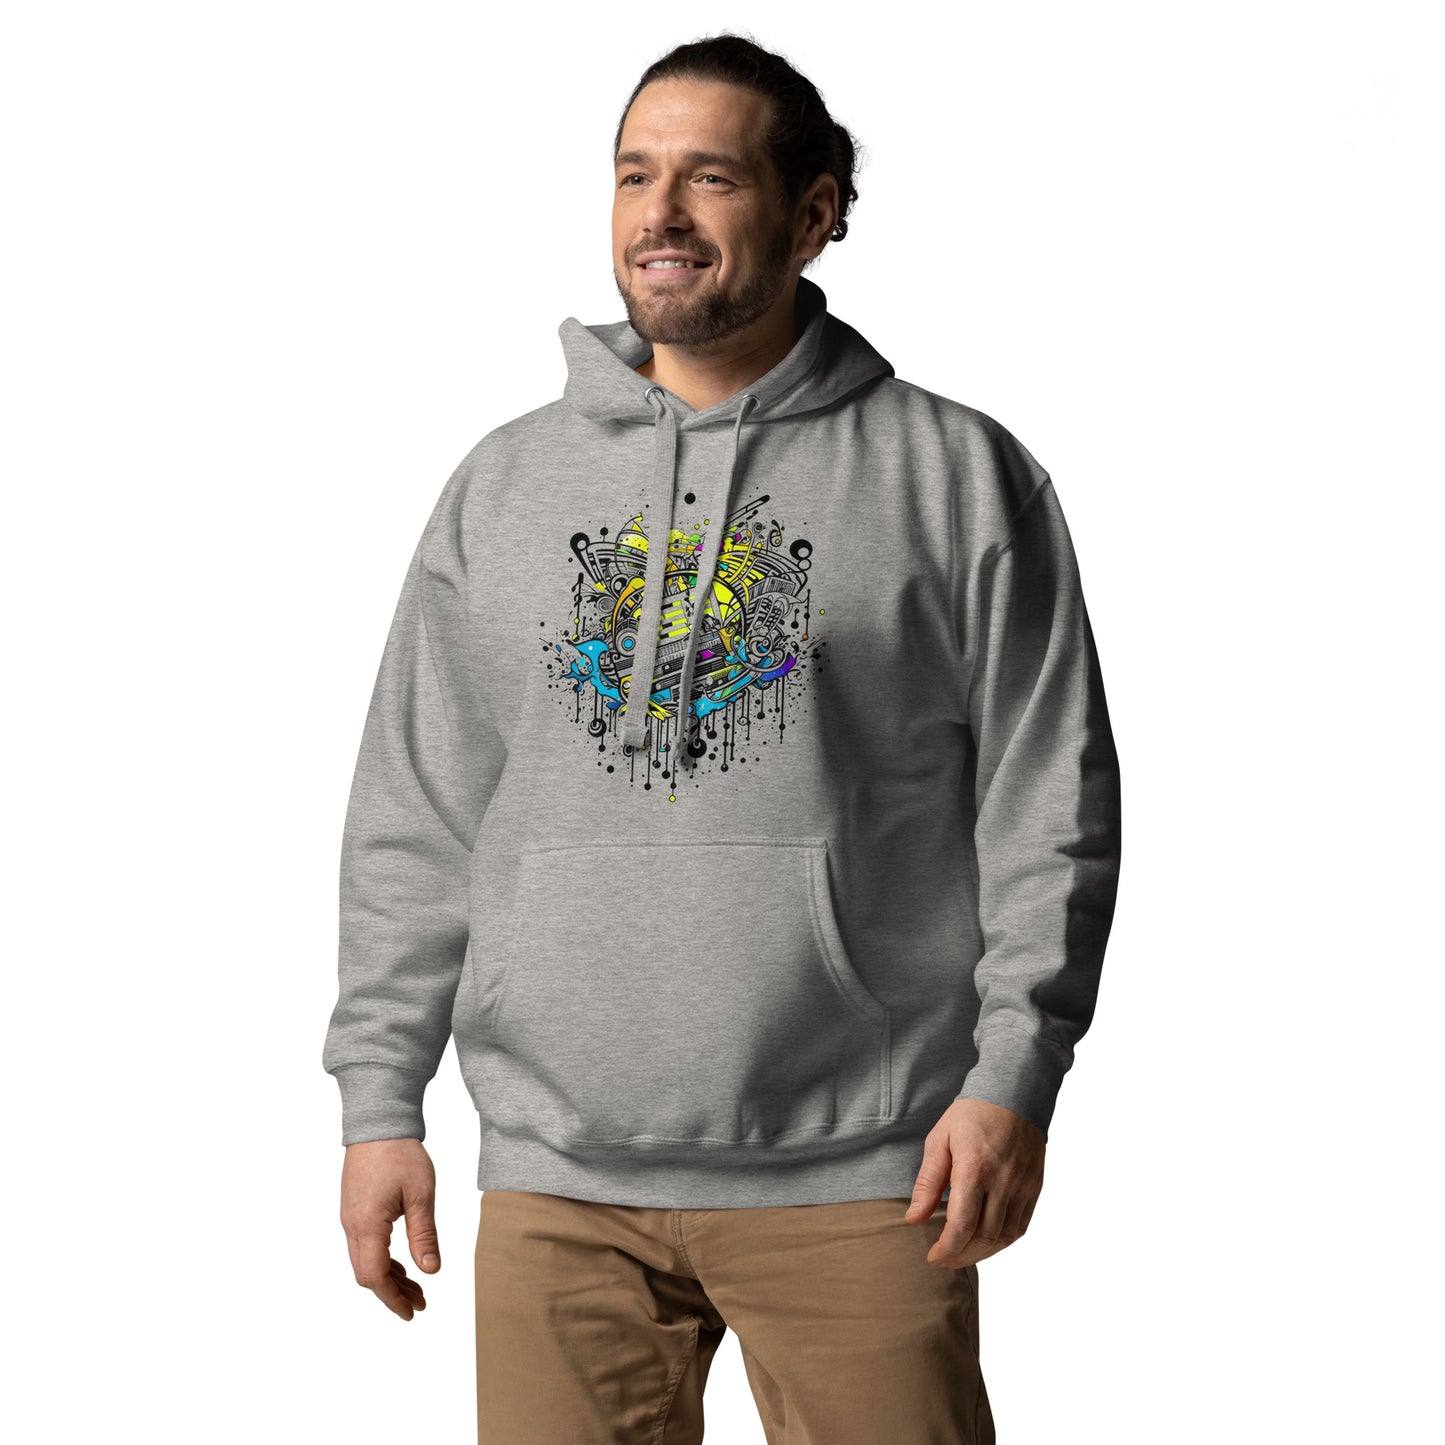 Rhythmic Heartbeat Unisex Hoodie | Artistry in Fashion | Mighty Self-Expressions